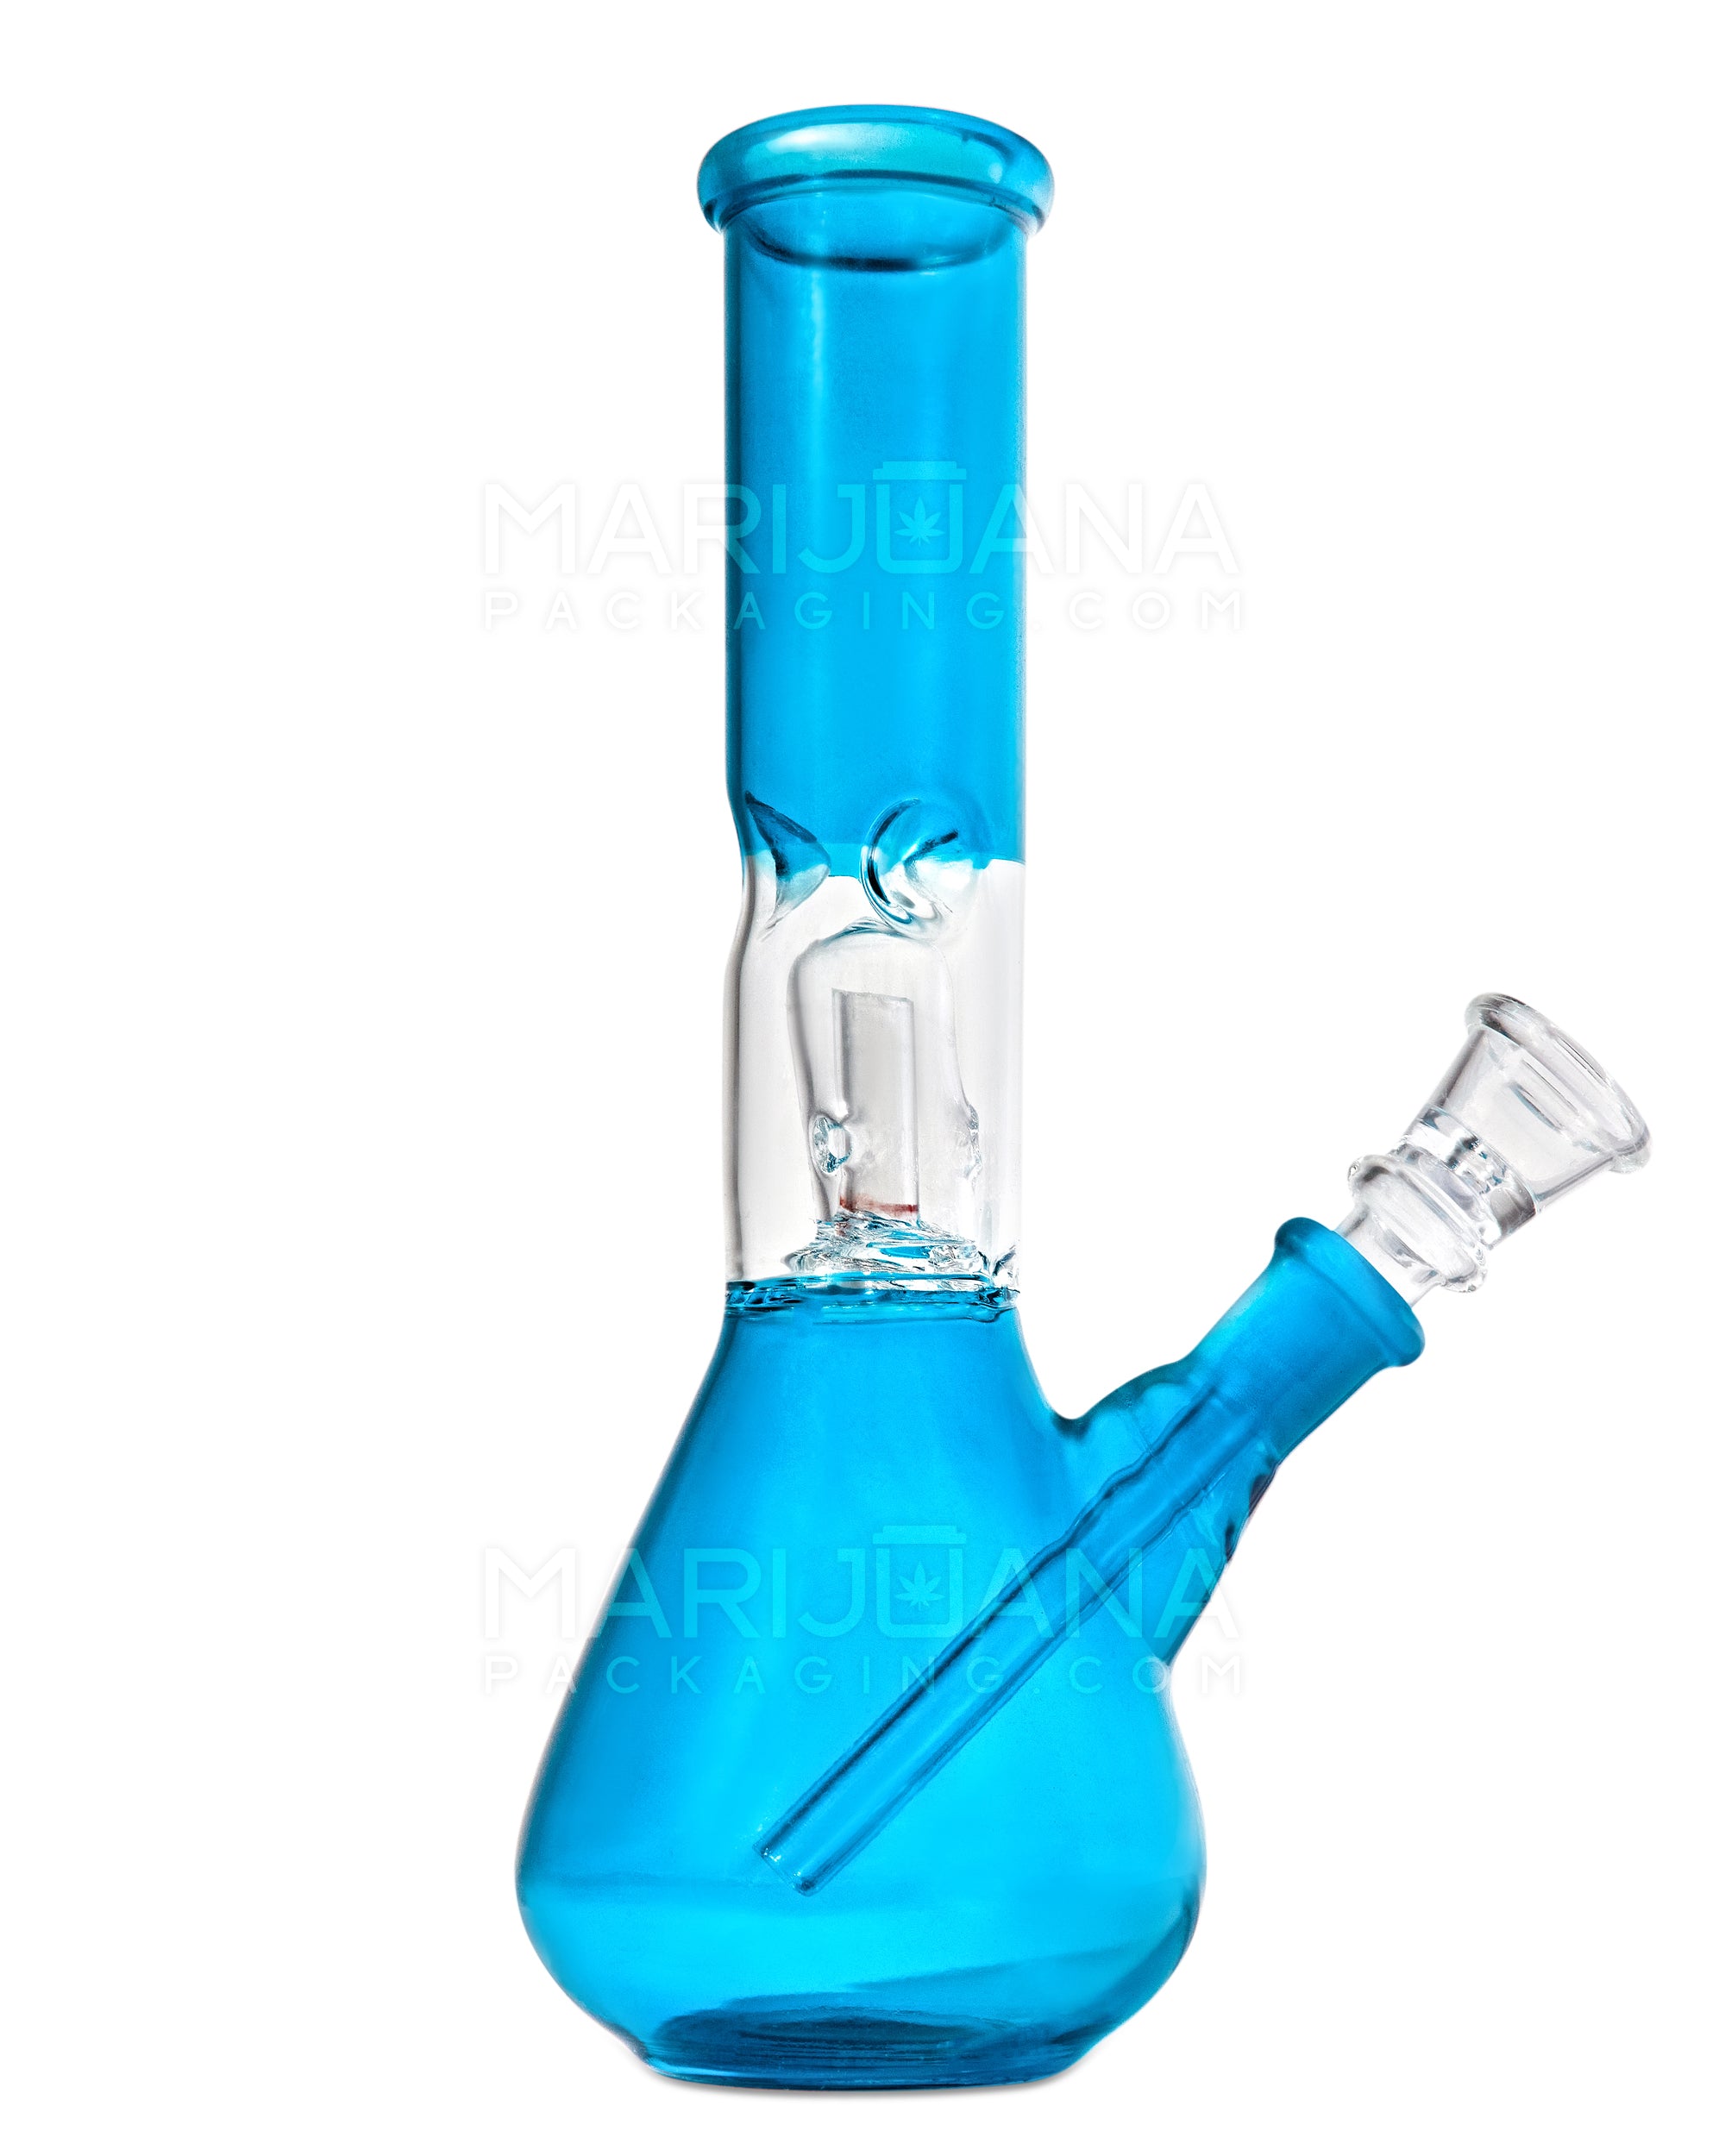 Straight Neck Dome Perc Glass Egg Water Pipe w/ Ice Catcher | 7.5in Tall - 14mm Bowl - Assorted - 4